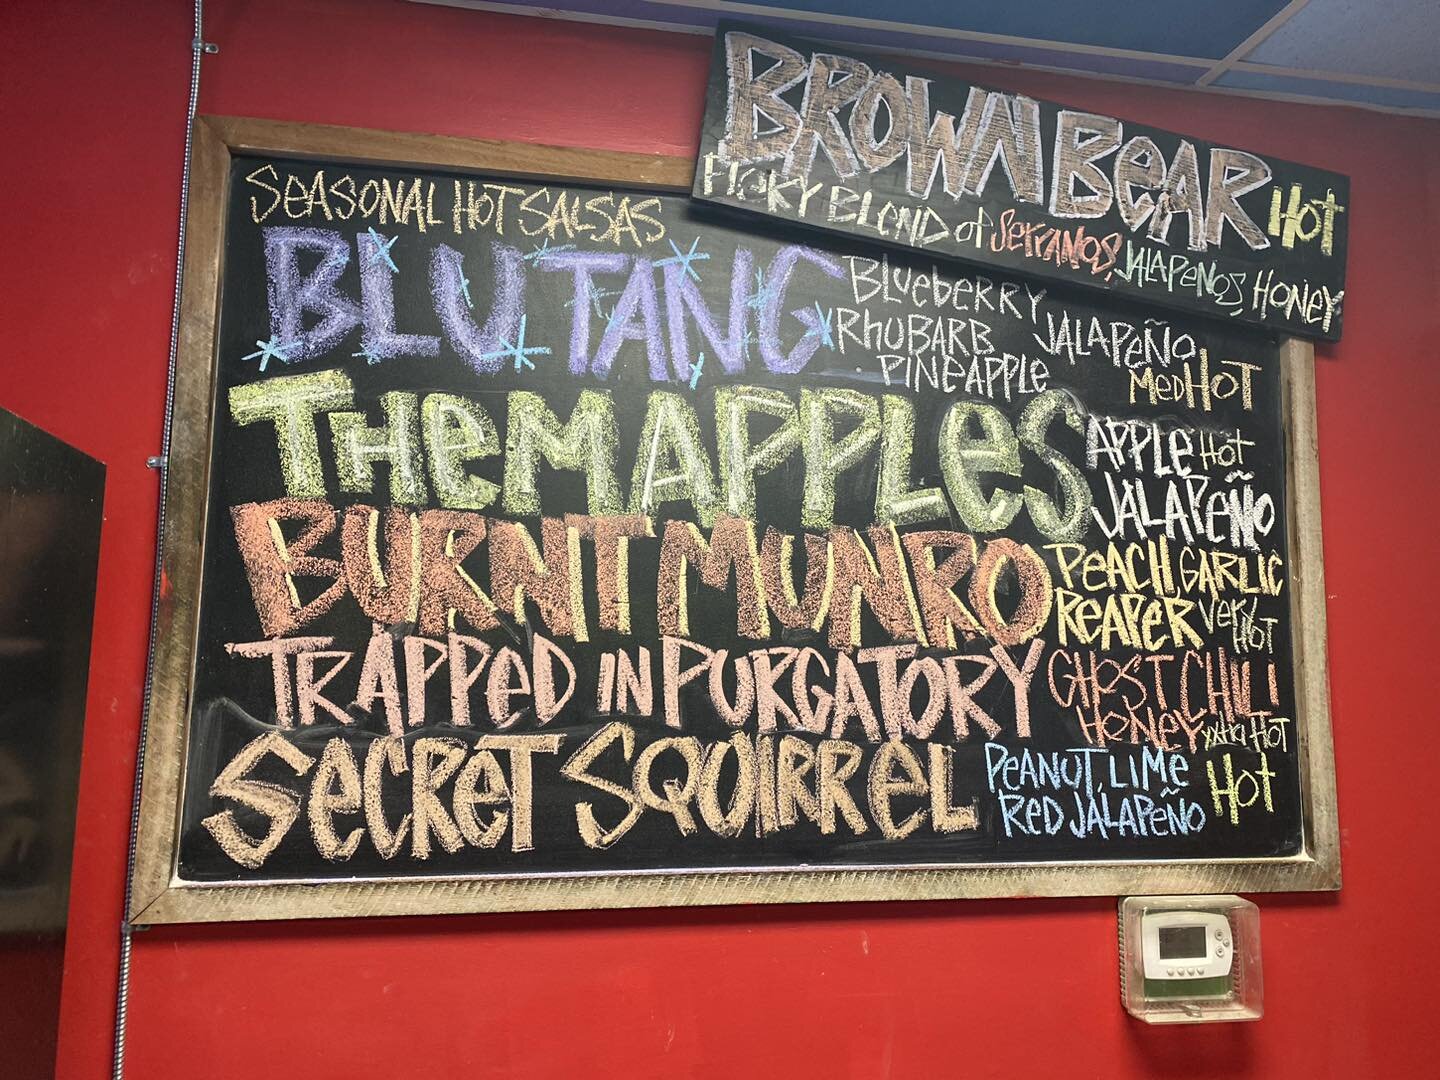 BLU TANG!!!🫐🍍🌶️🪴
 Back for another tour at MB!
 blueberry, pineapple, rhubarb, jalape&ntilde;o 

and introducing...

SECRET SQUIRREL🤫🐿️🌶️ ❤️
 peanut, red jalape&ntilde;o, lime